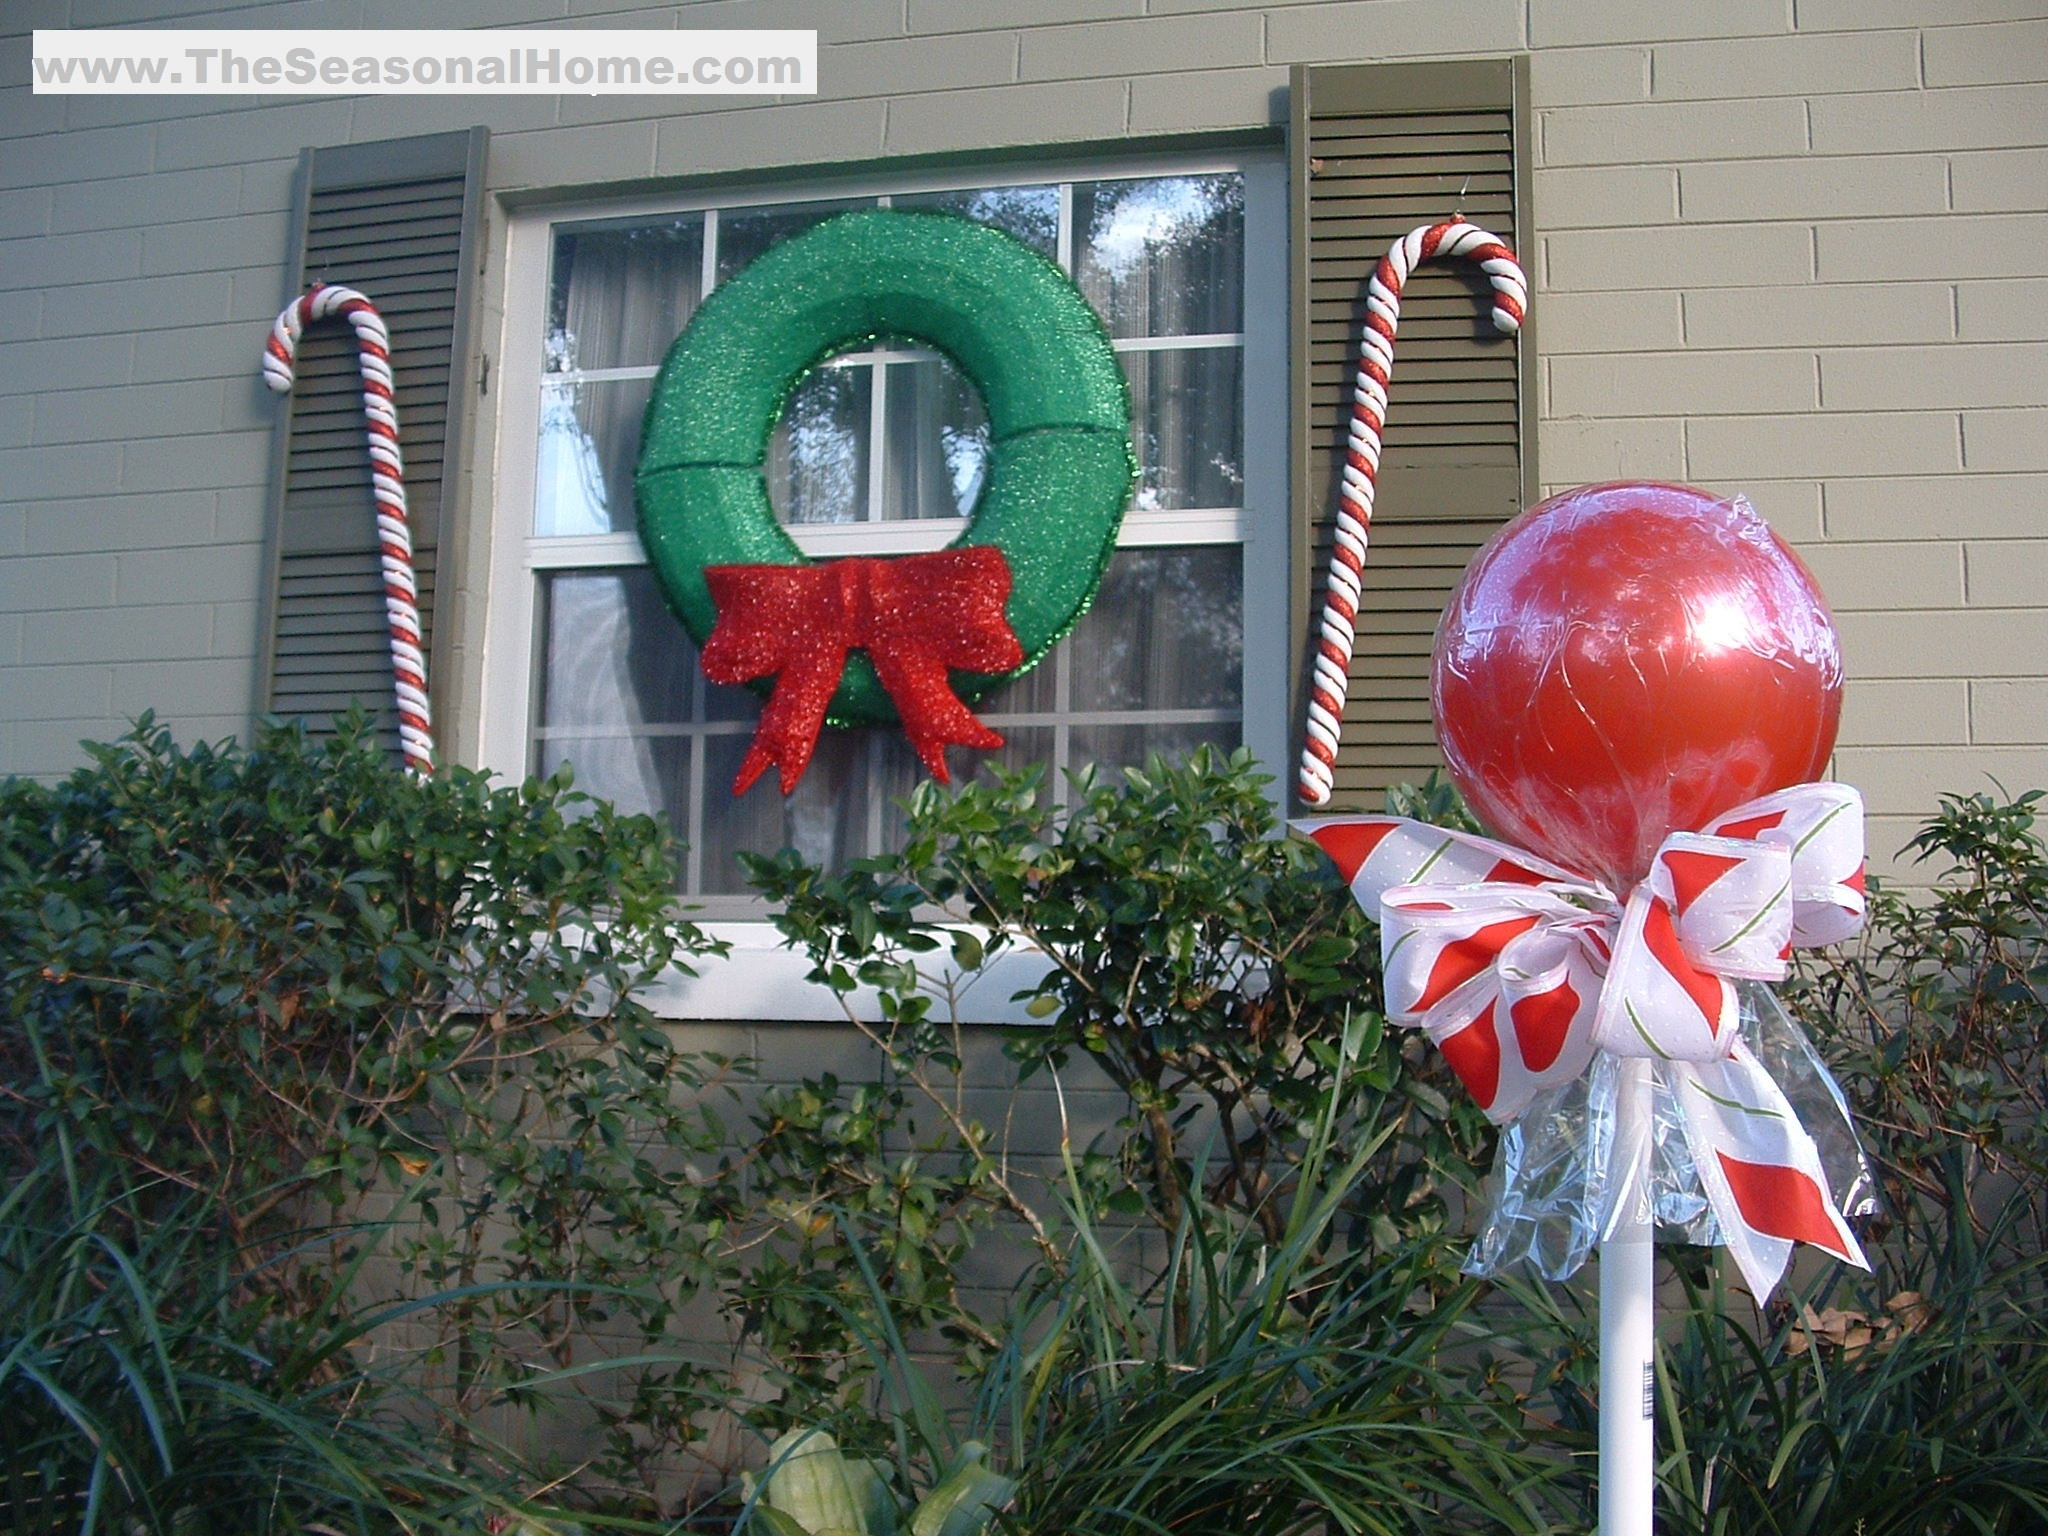 Cheap DIY Outdoor Christmas Decorations
 Outdoor “CANDY” A Christmas Decorating Idea The